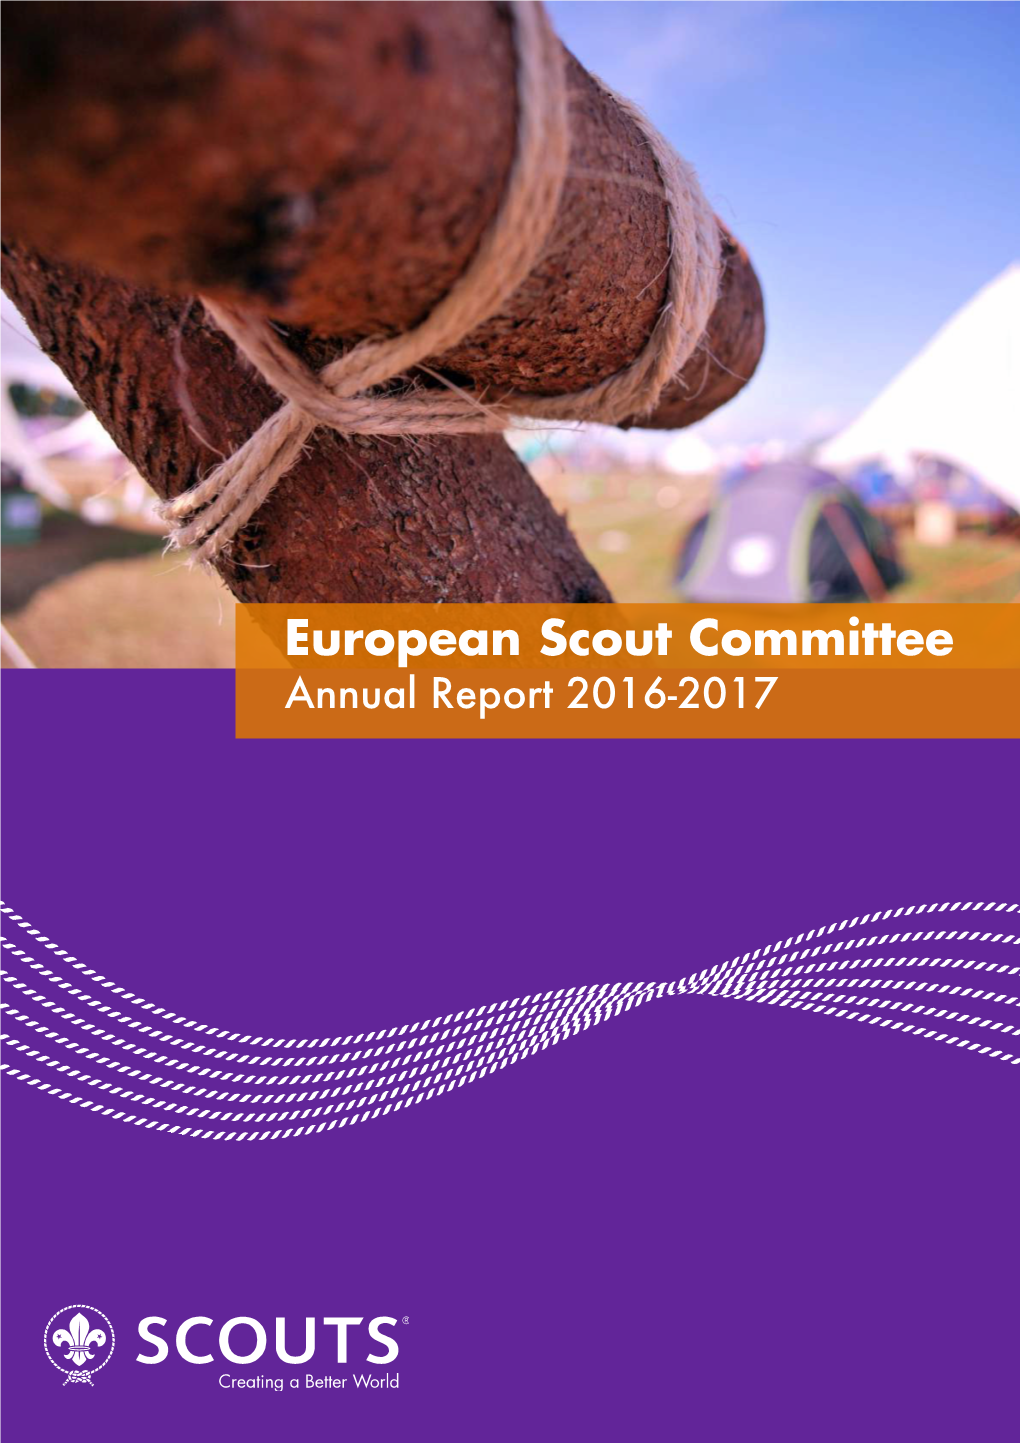 European Scout Committee Annual Report 2016-2017 Content